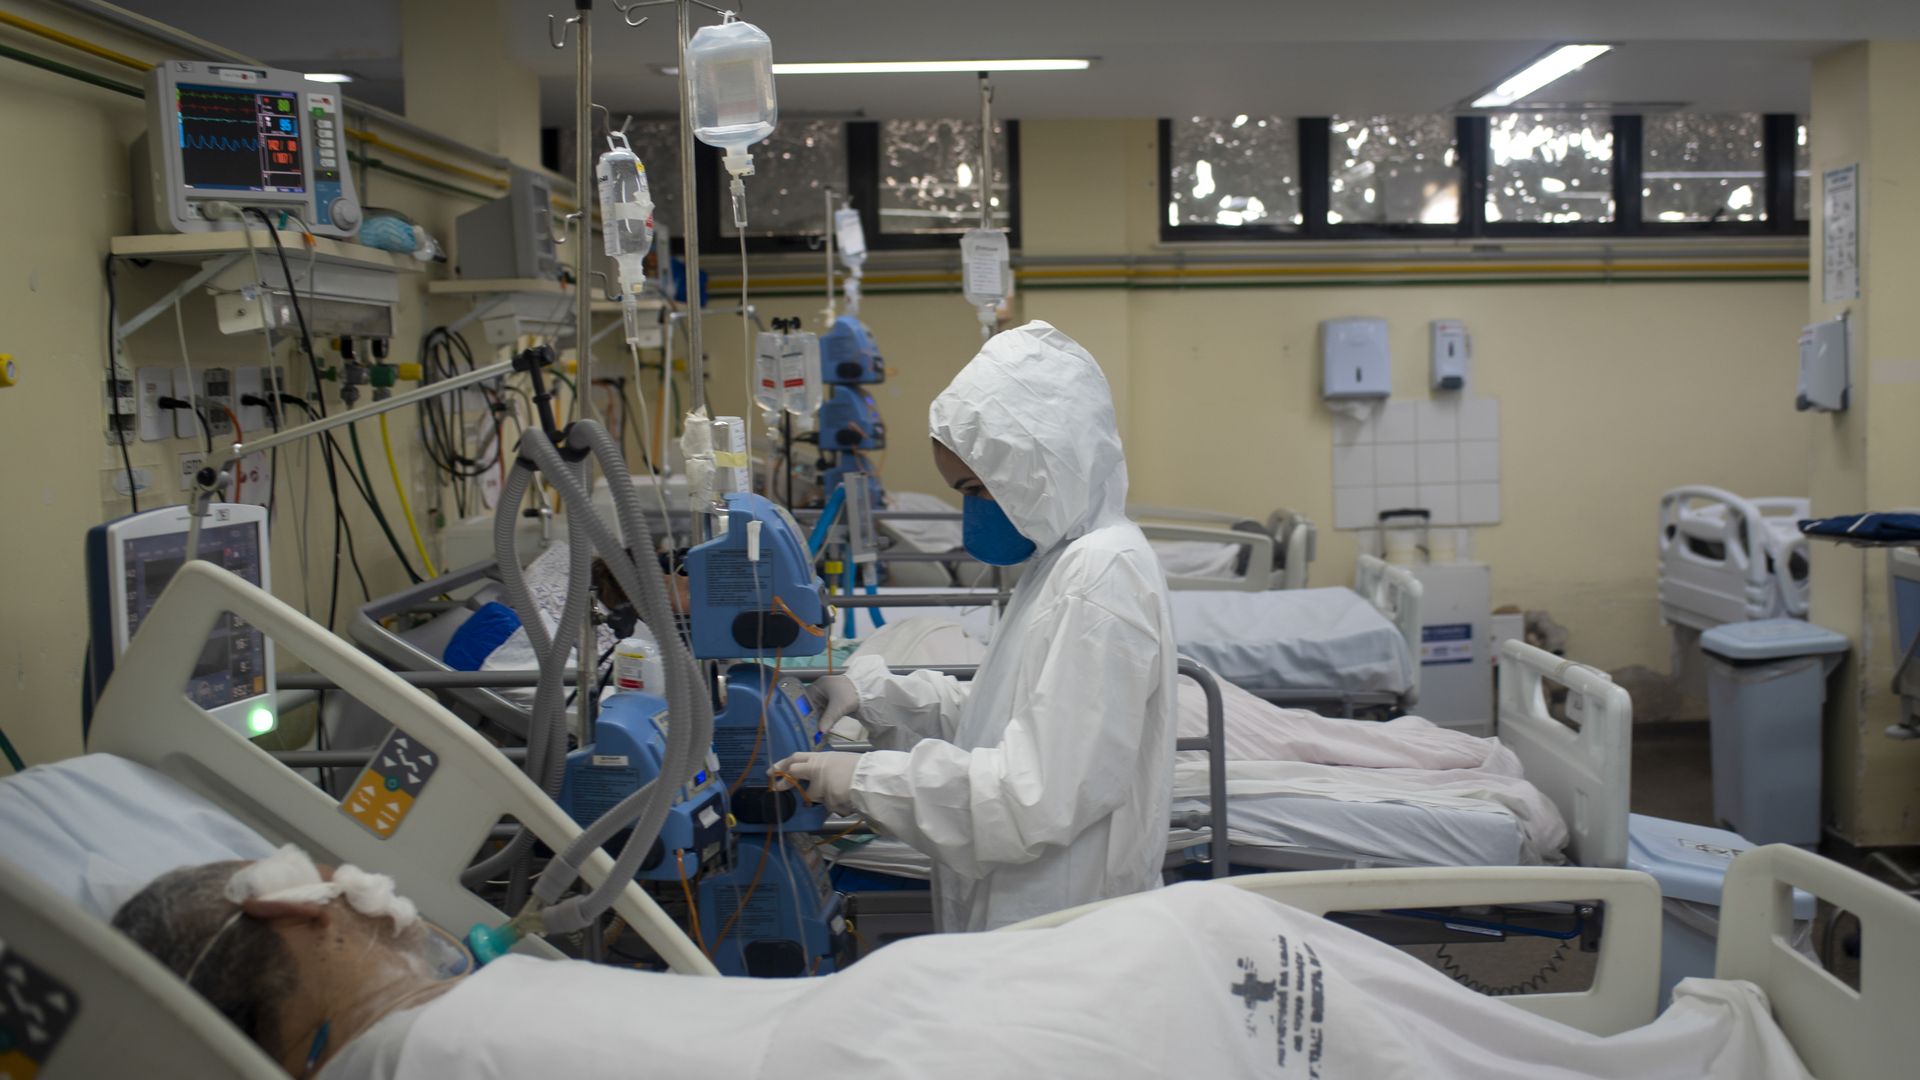 A hosptial worker in a white hooded hazmat suit stands among hospital beds where patients appear to be on ventilators.